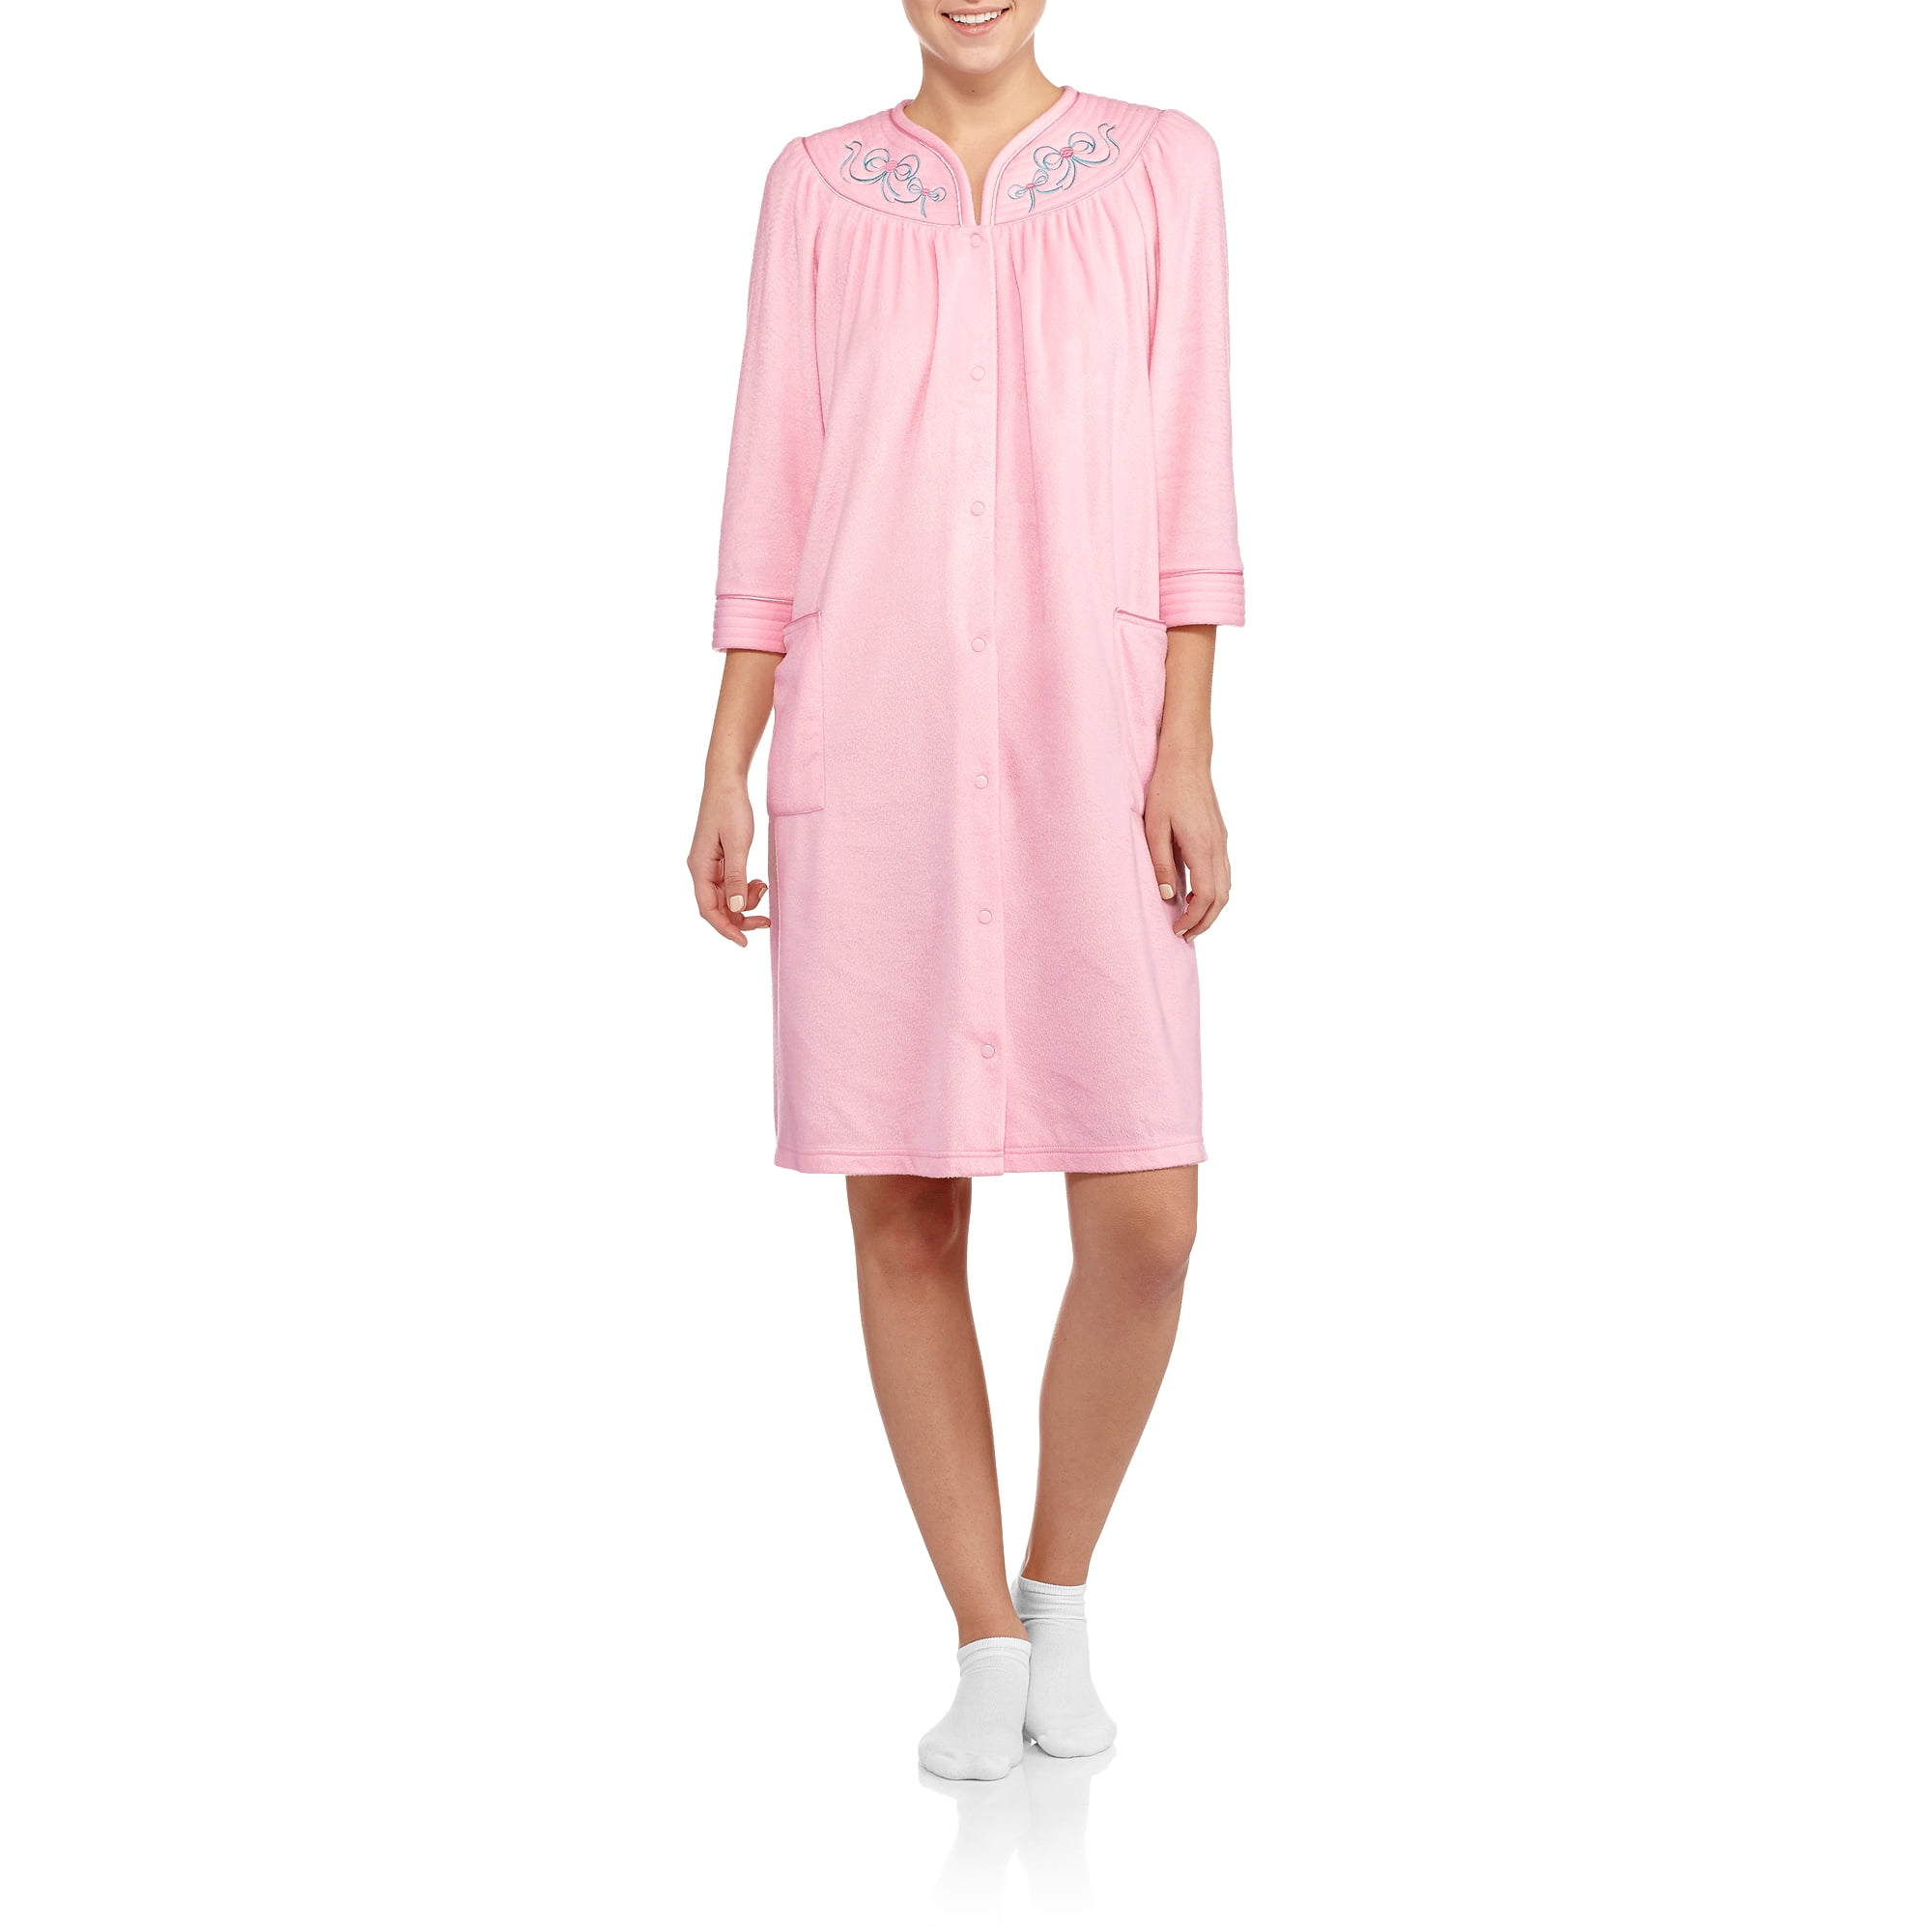 White Stag Microfleece Solid Breakfast Gown - Walmart.com